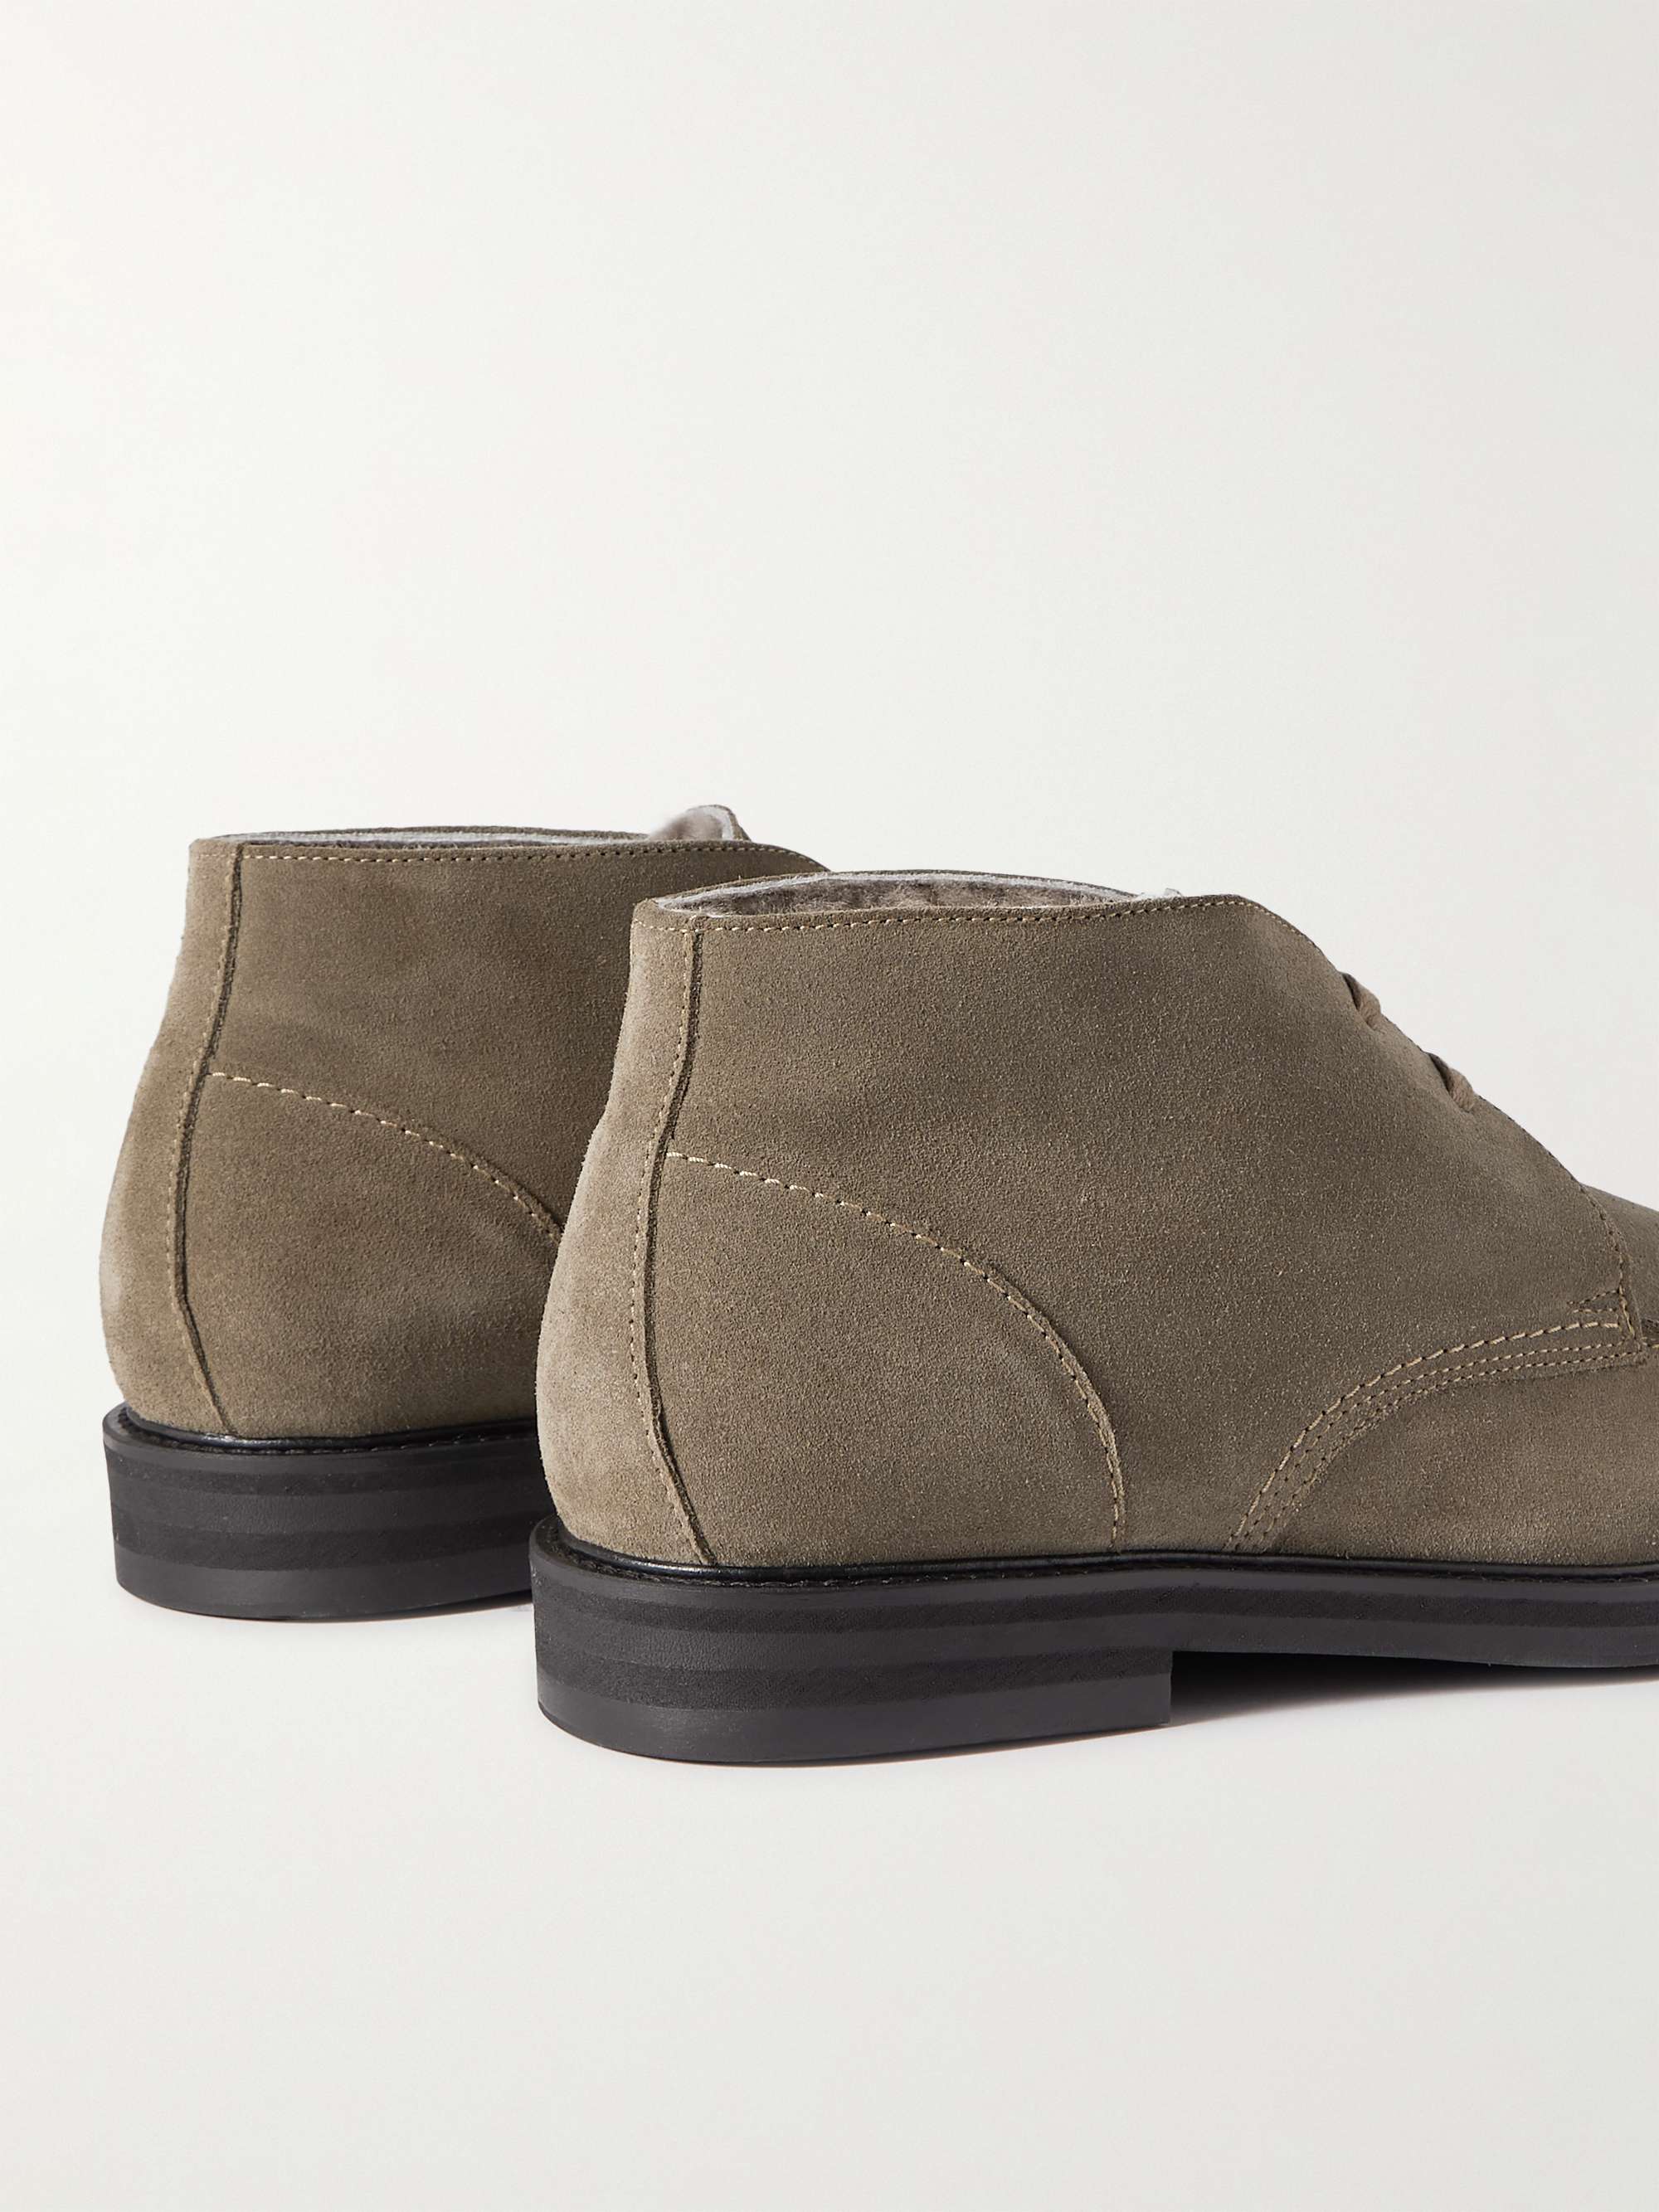 MR P. Andrew Split-Toe Shearling-Lined Waxed-Suede Chukka Boots for Men ...